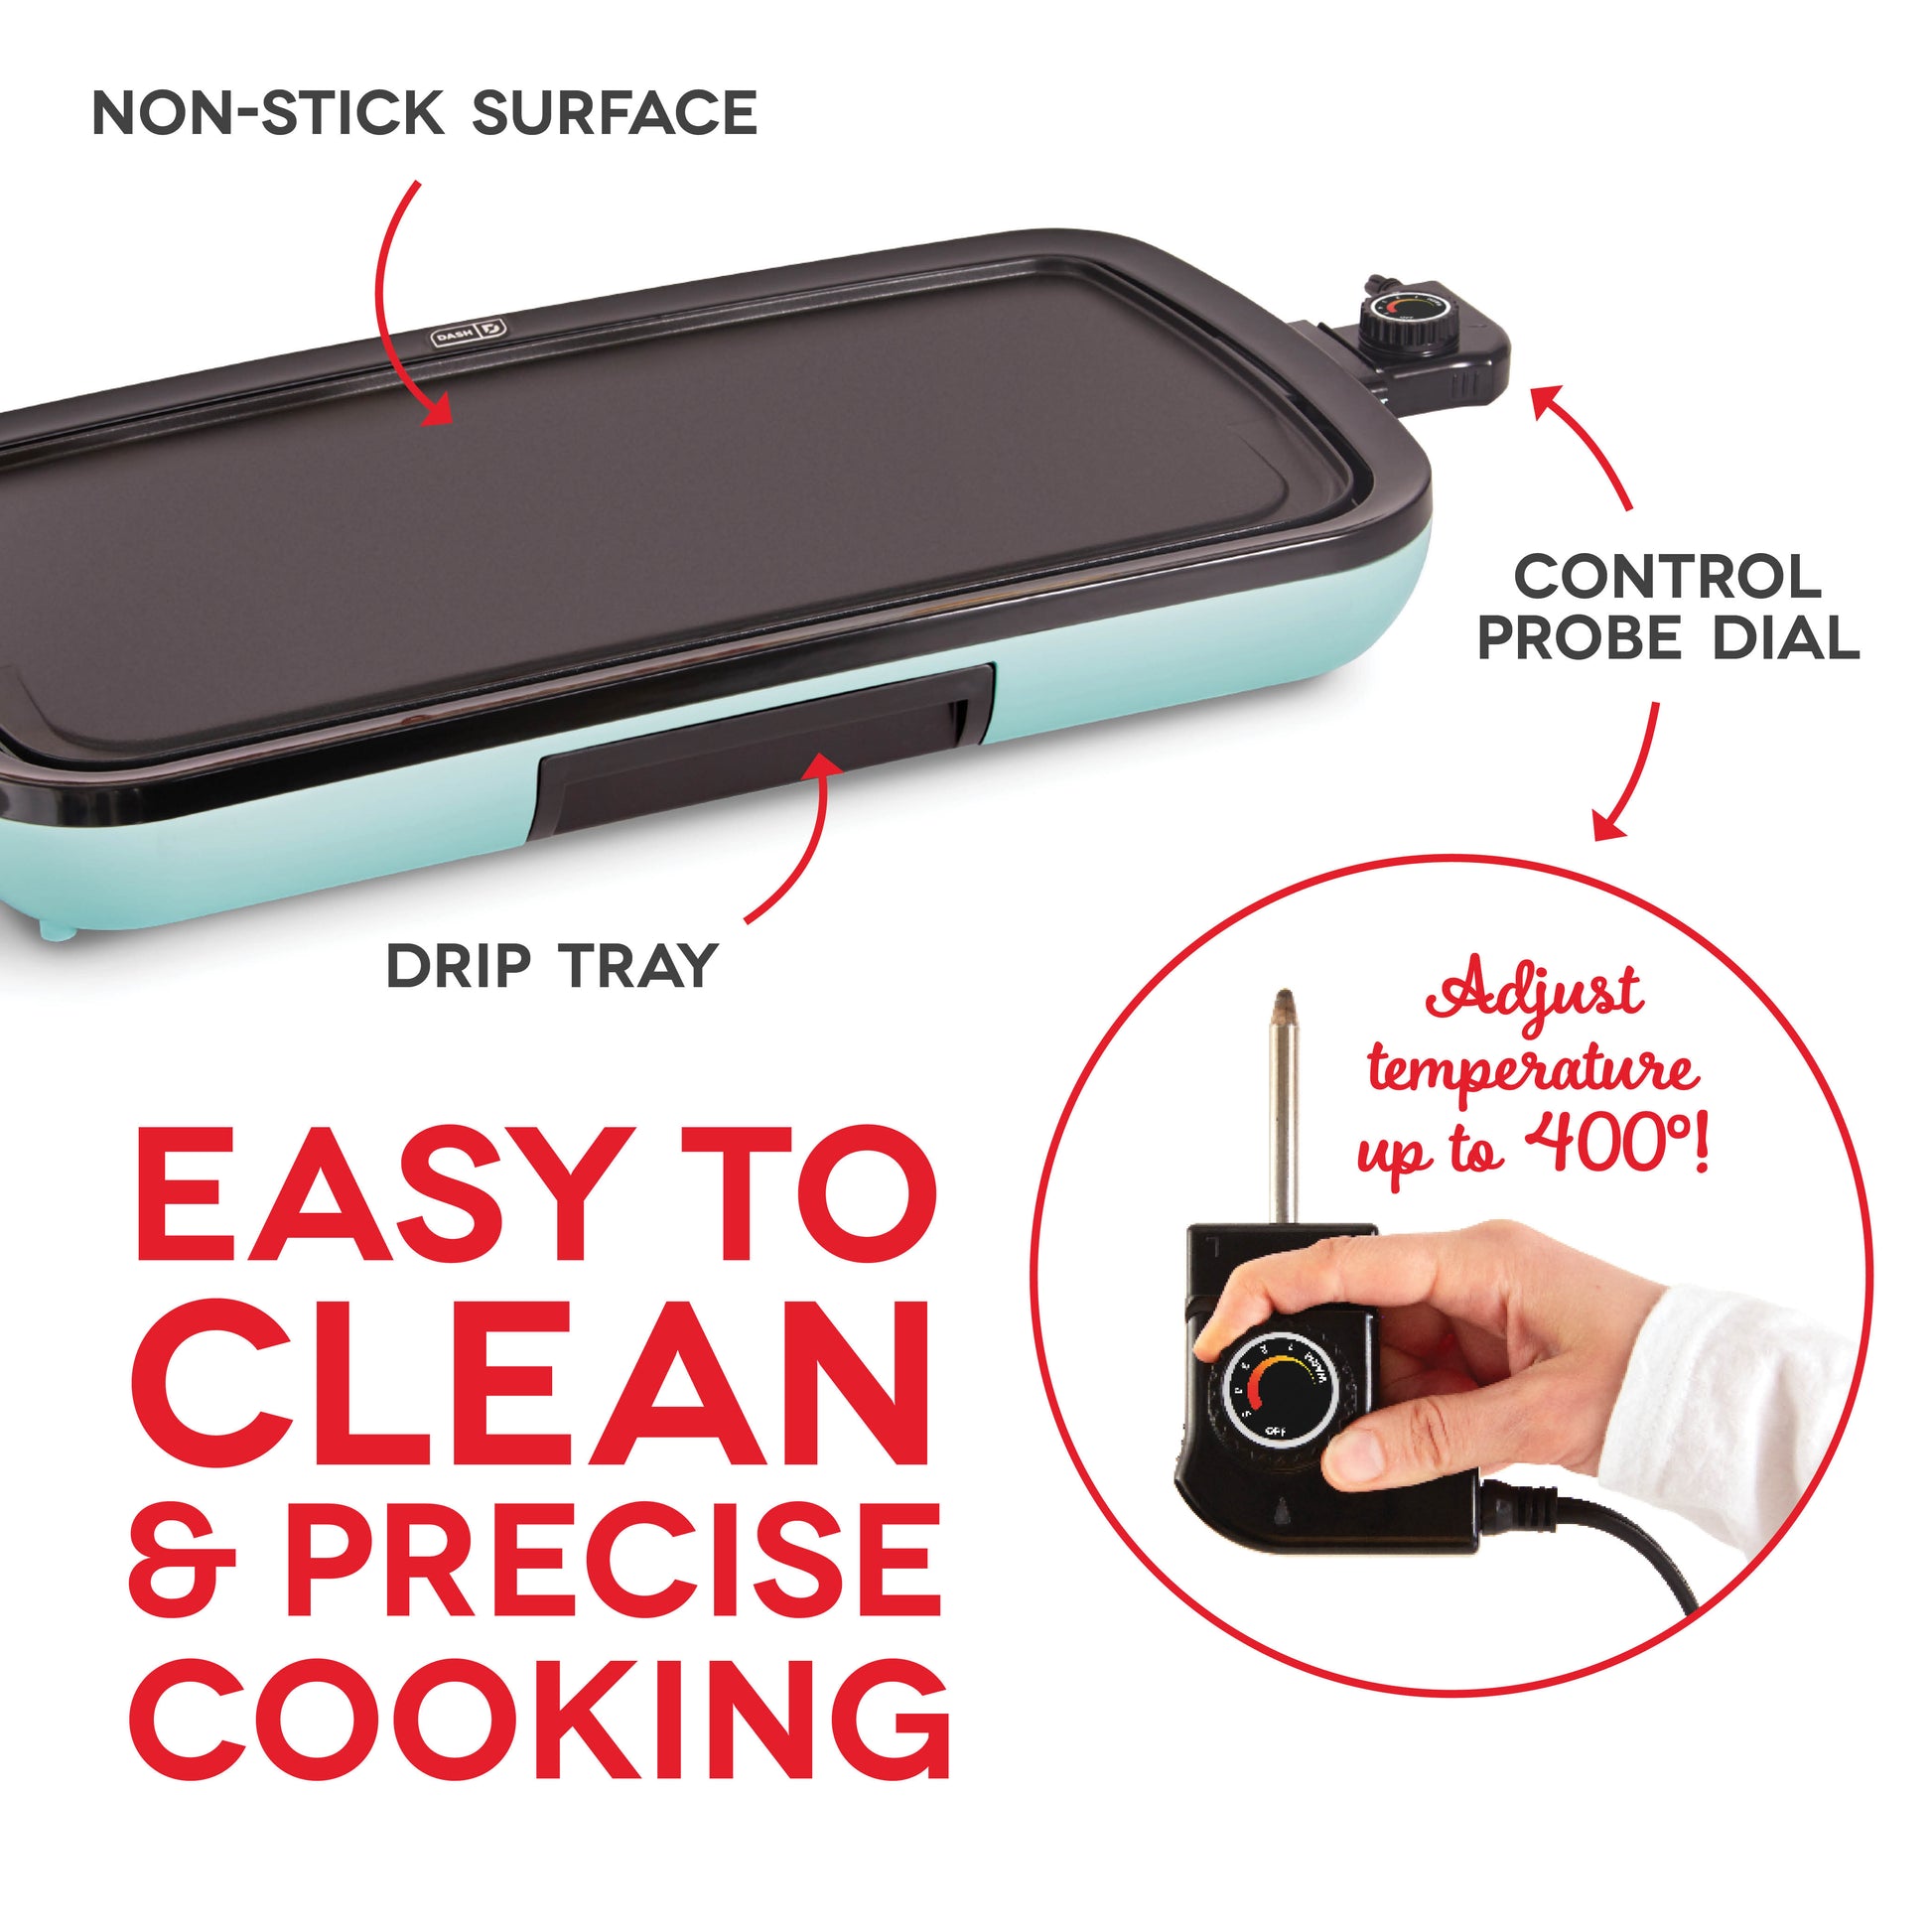 Dash Everyday Nonstick Deluxe Electric Griddle with Removable